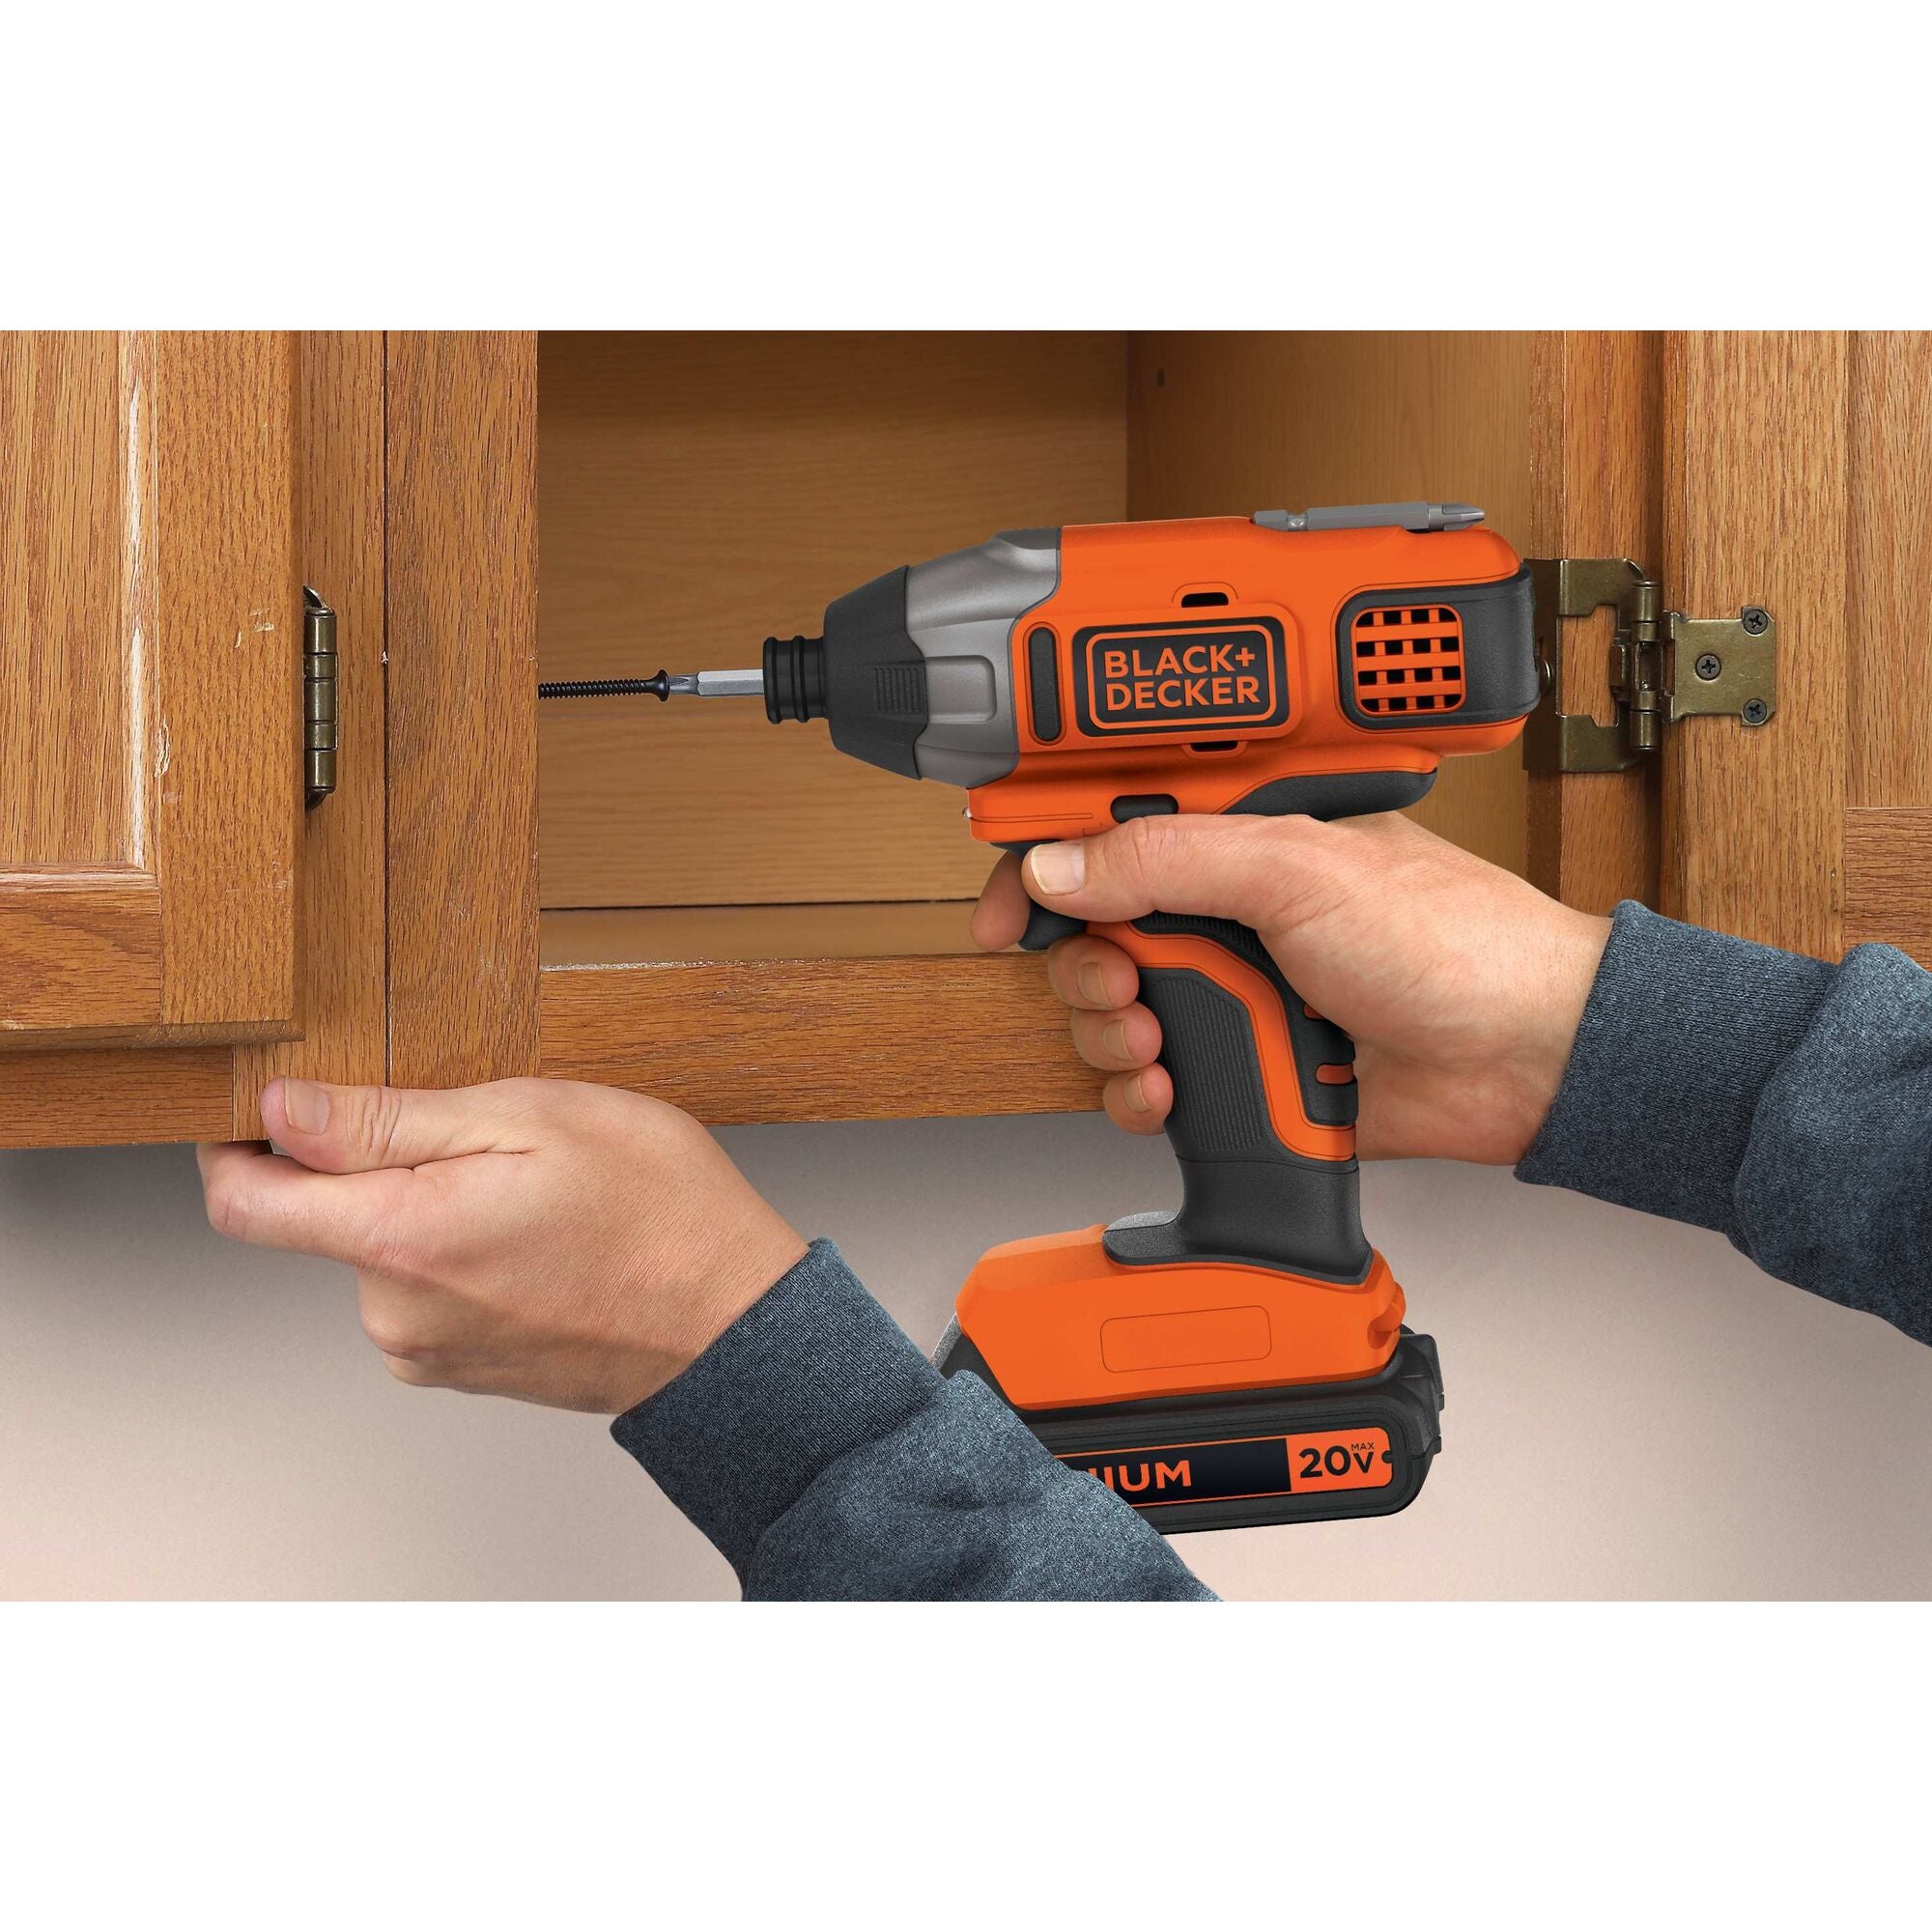 Used Black & Decker Cordless Electric Drill